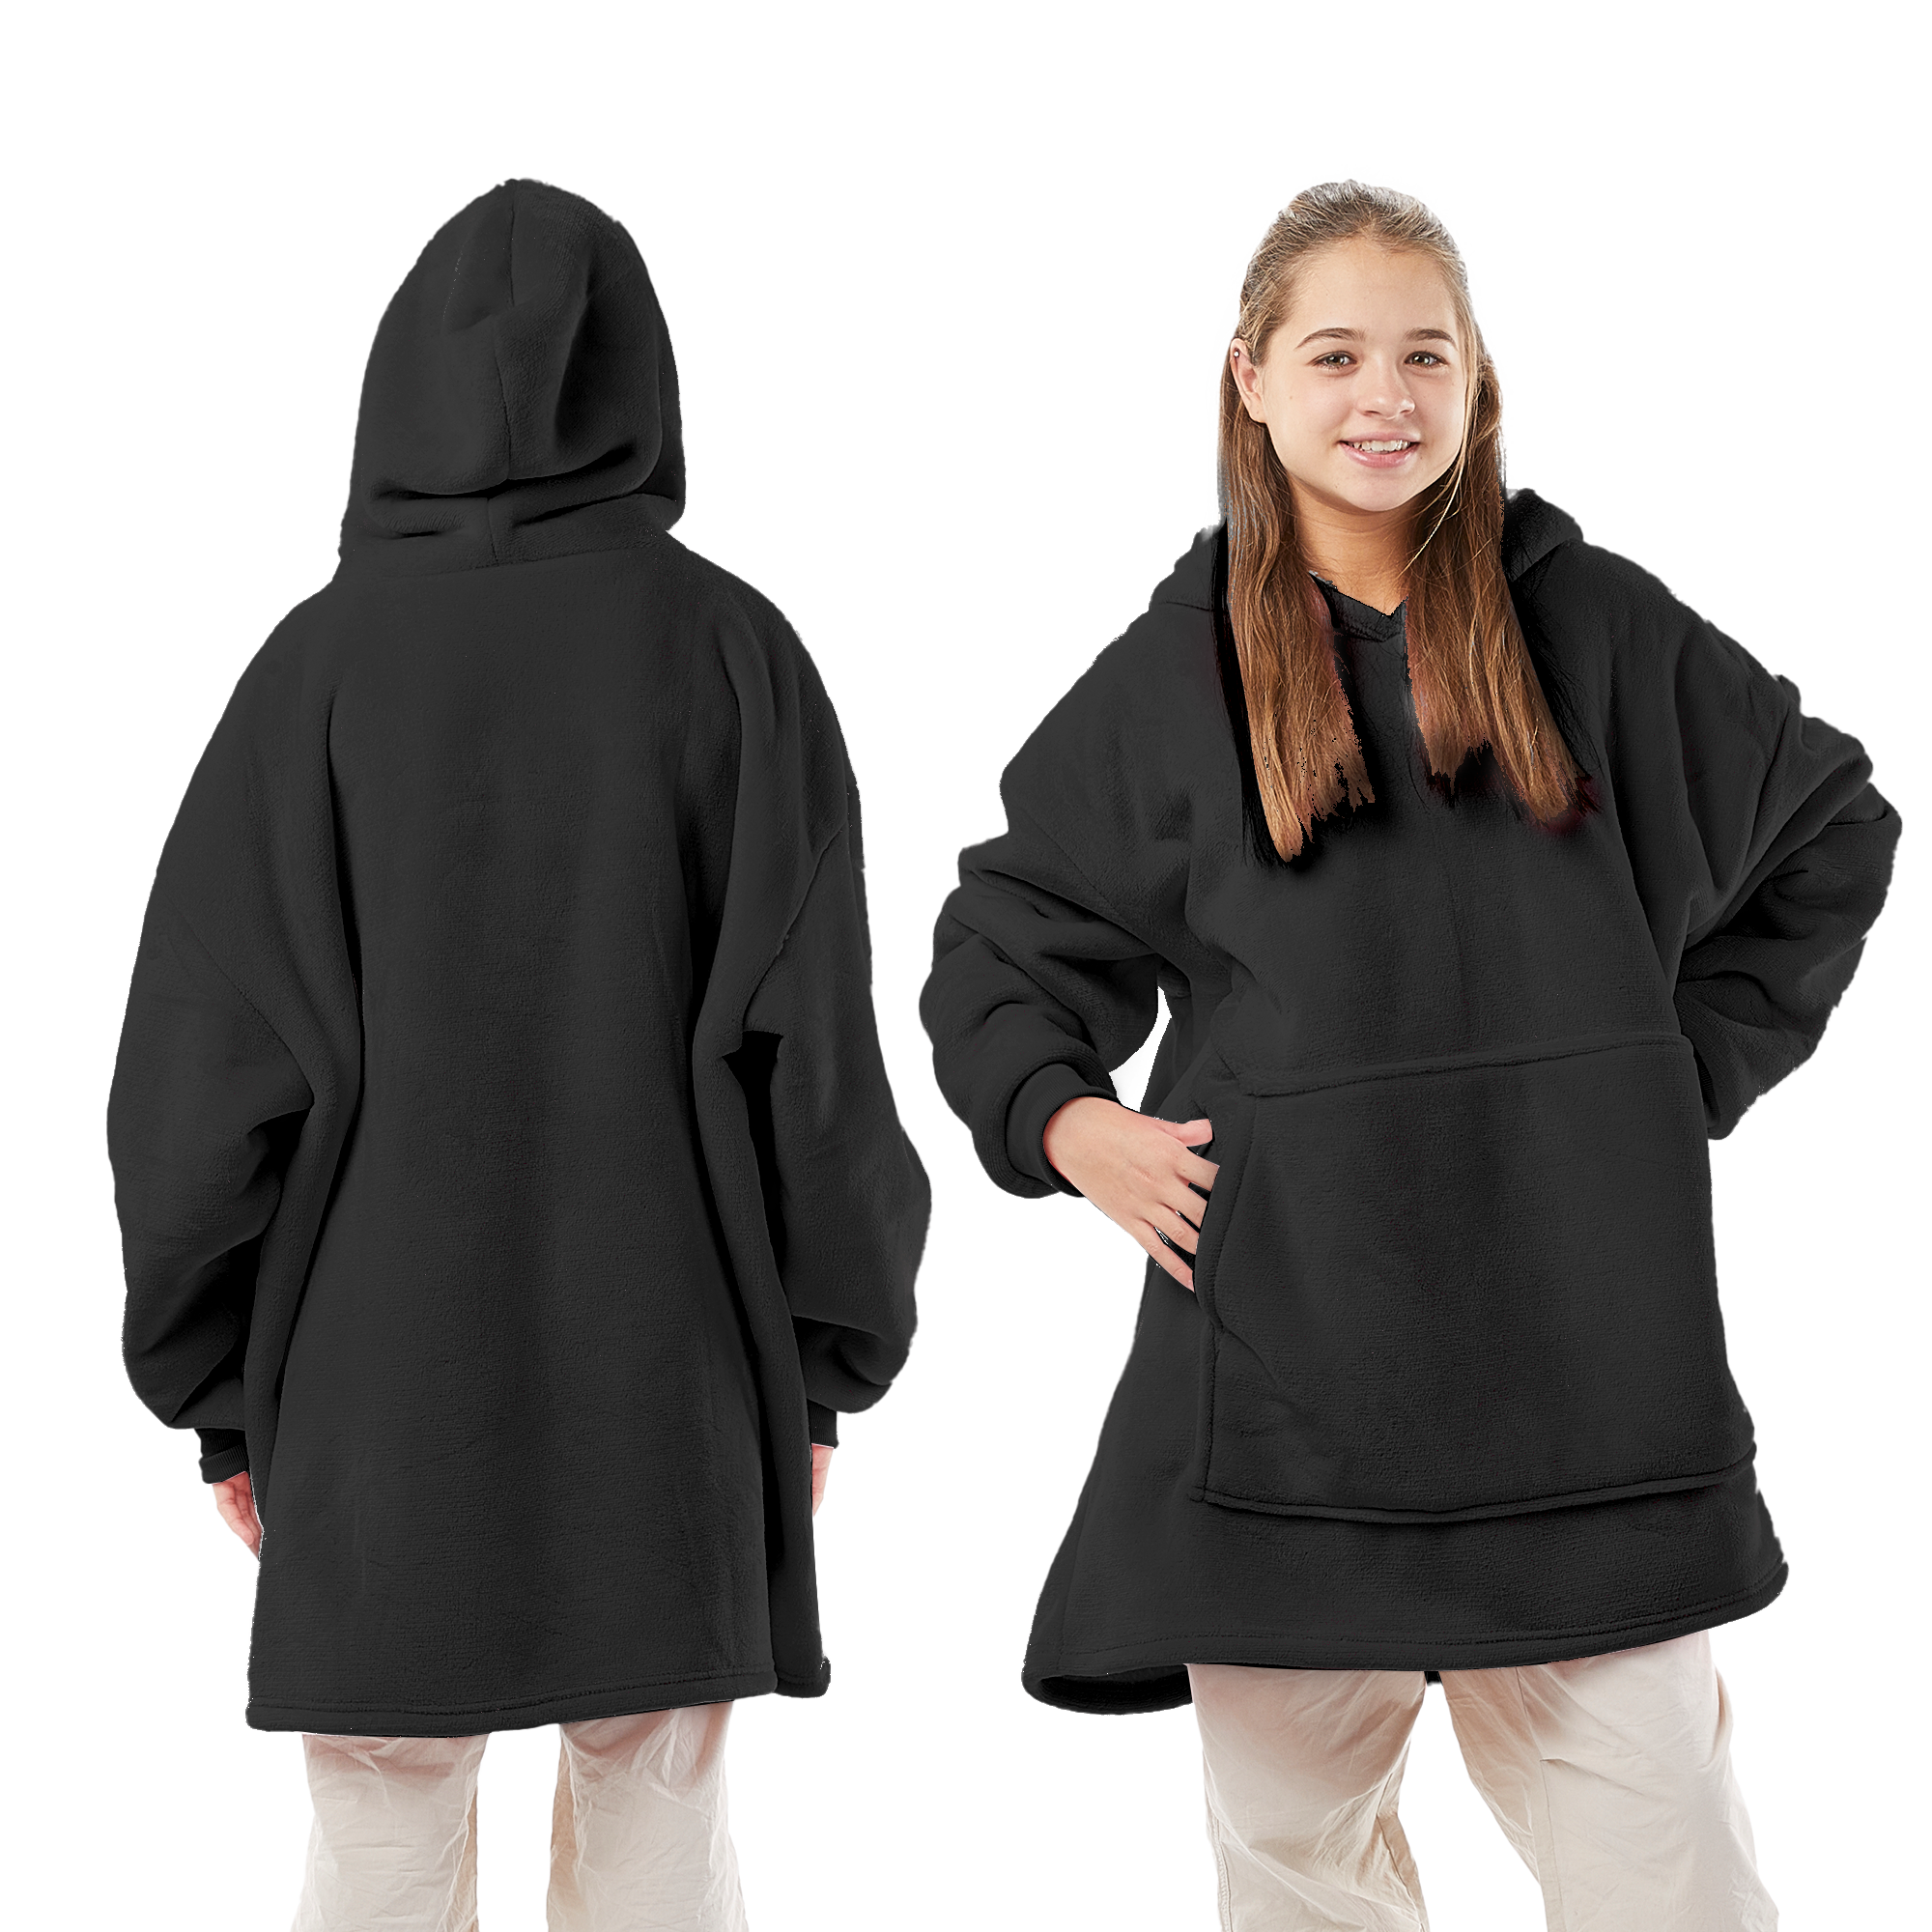 Oversized Blanket Hoodie - Thermal, Soft & Comfortable and Long Length Throw Hoodie